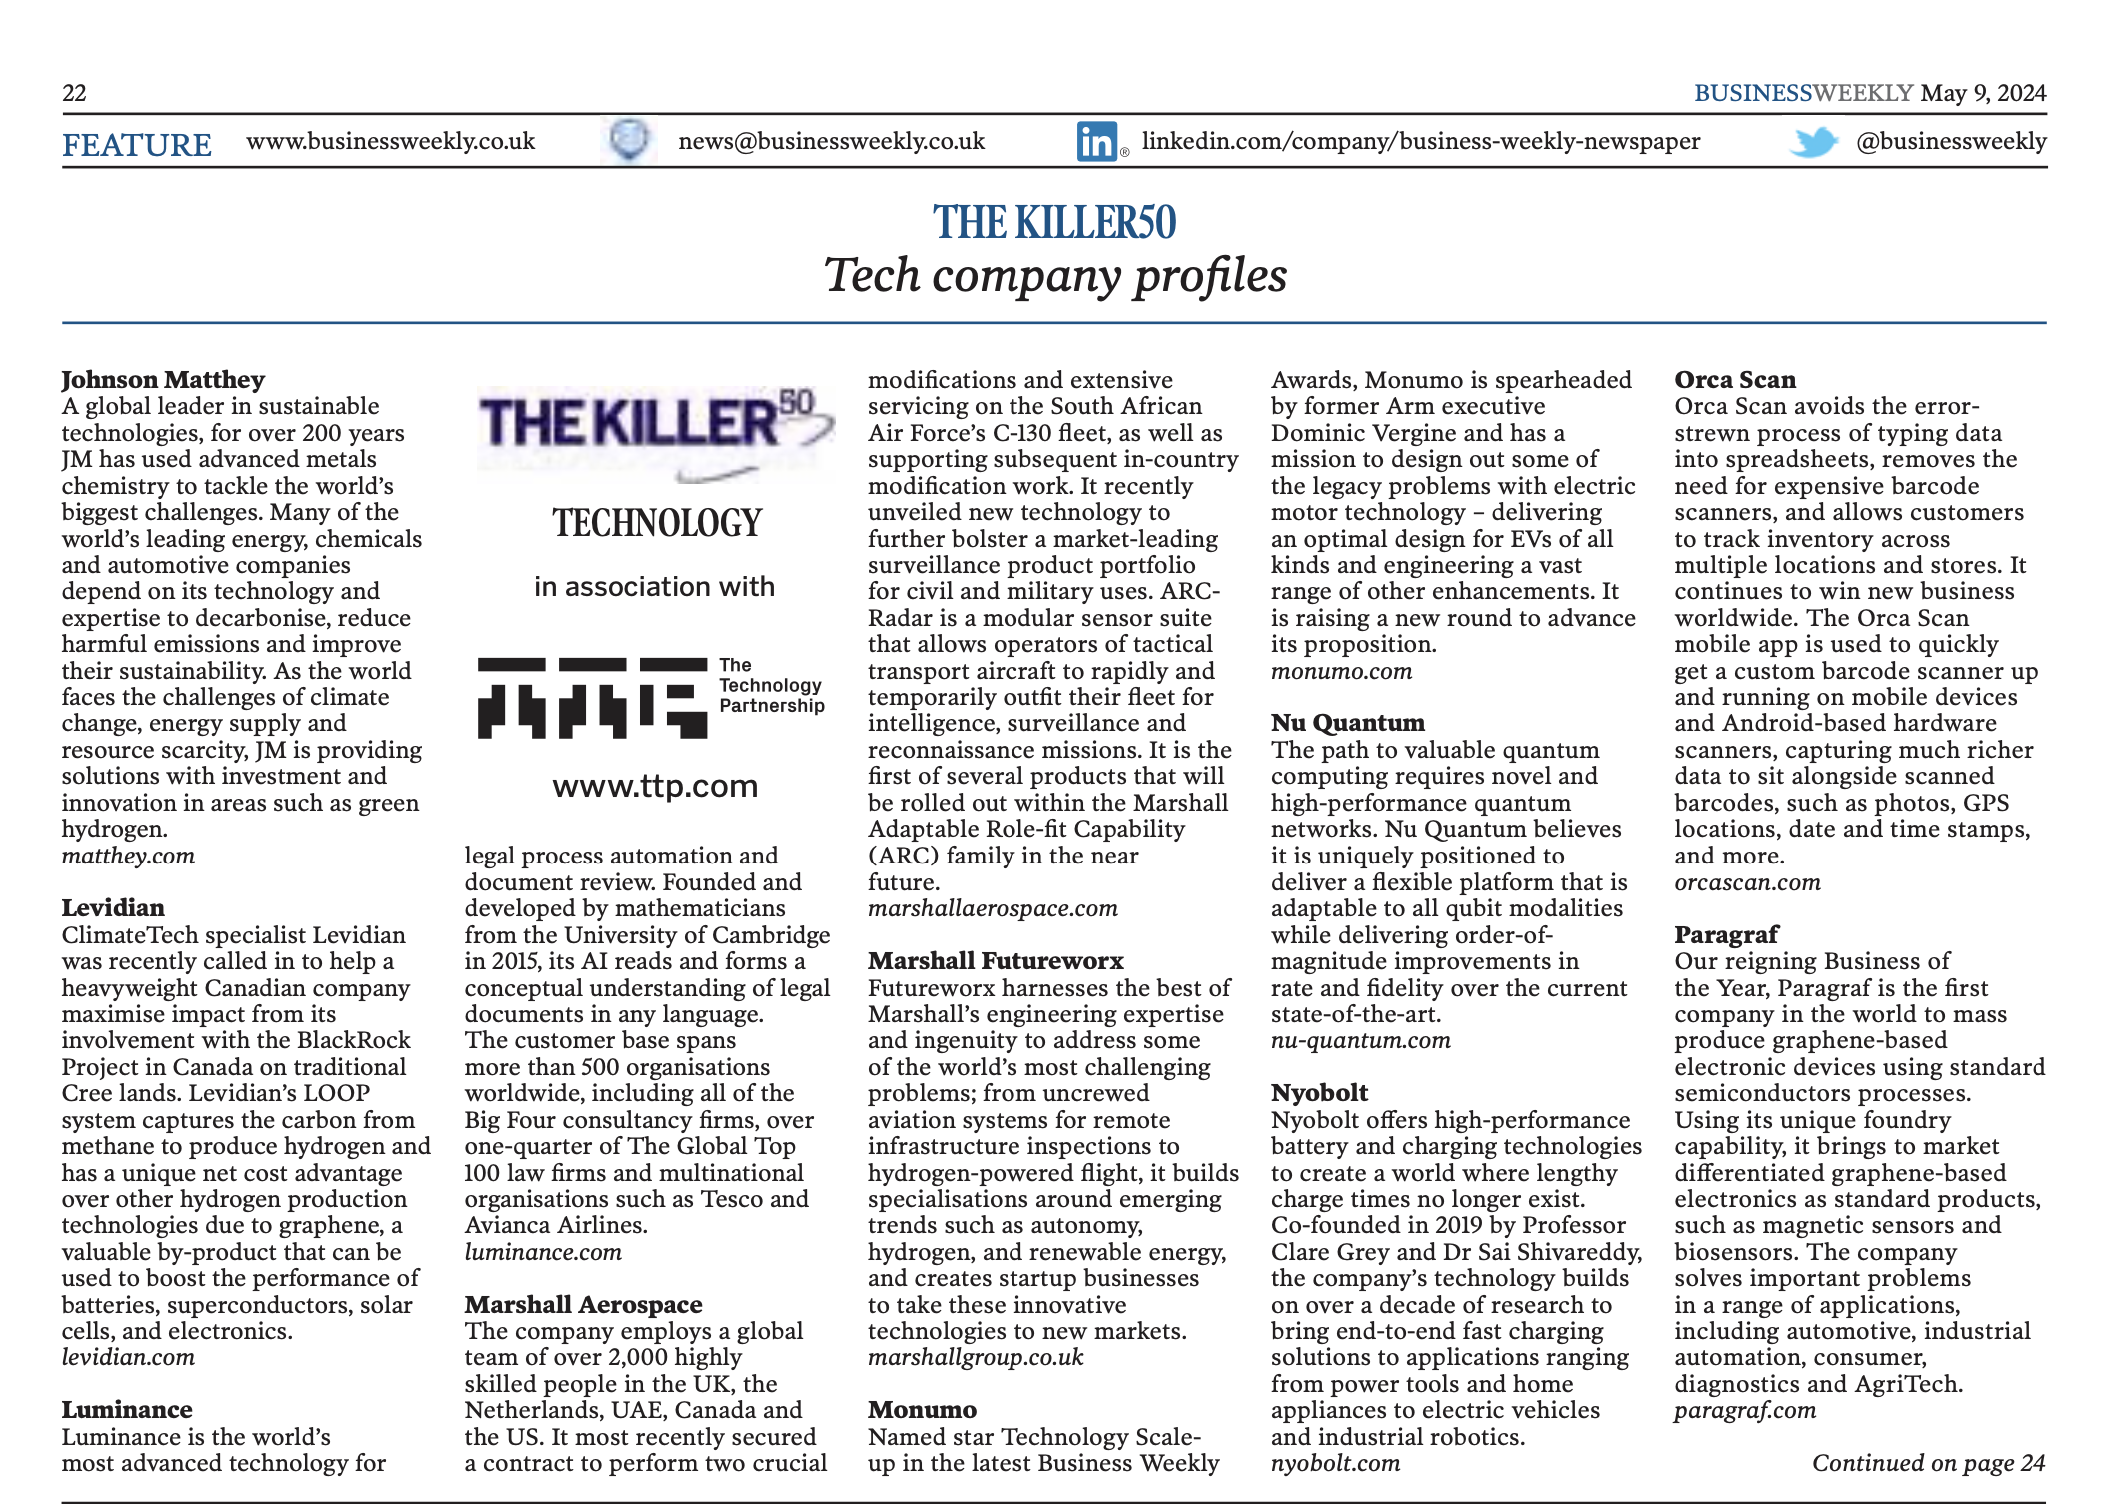 Orca Scan mentioned in Business Weekly’s The Killer 50 - Tech Company Profiles